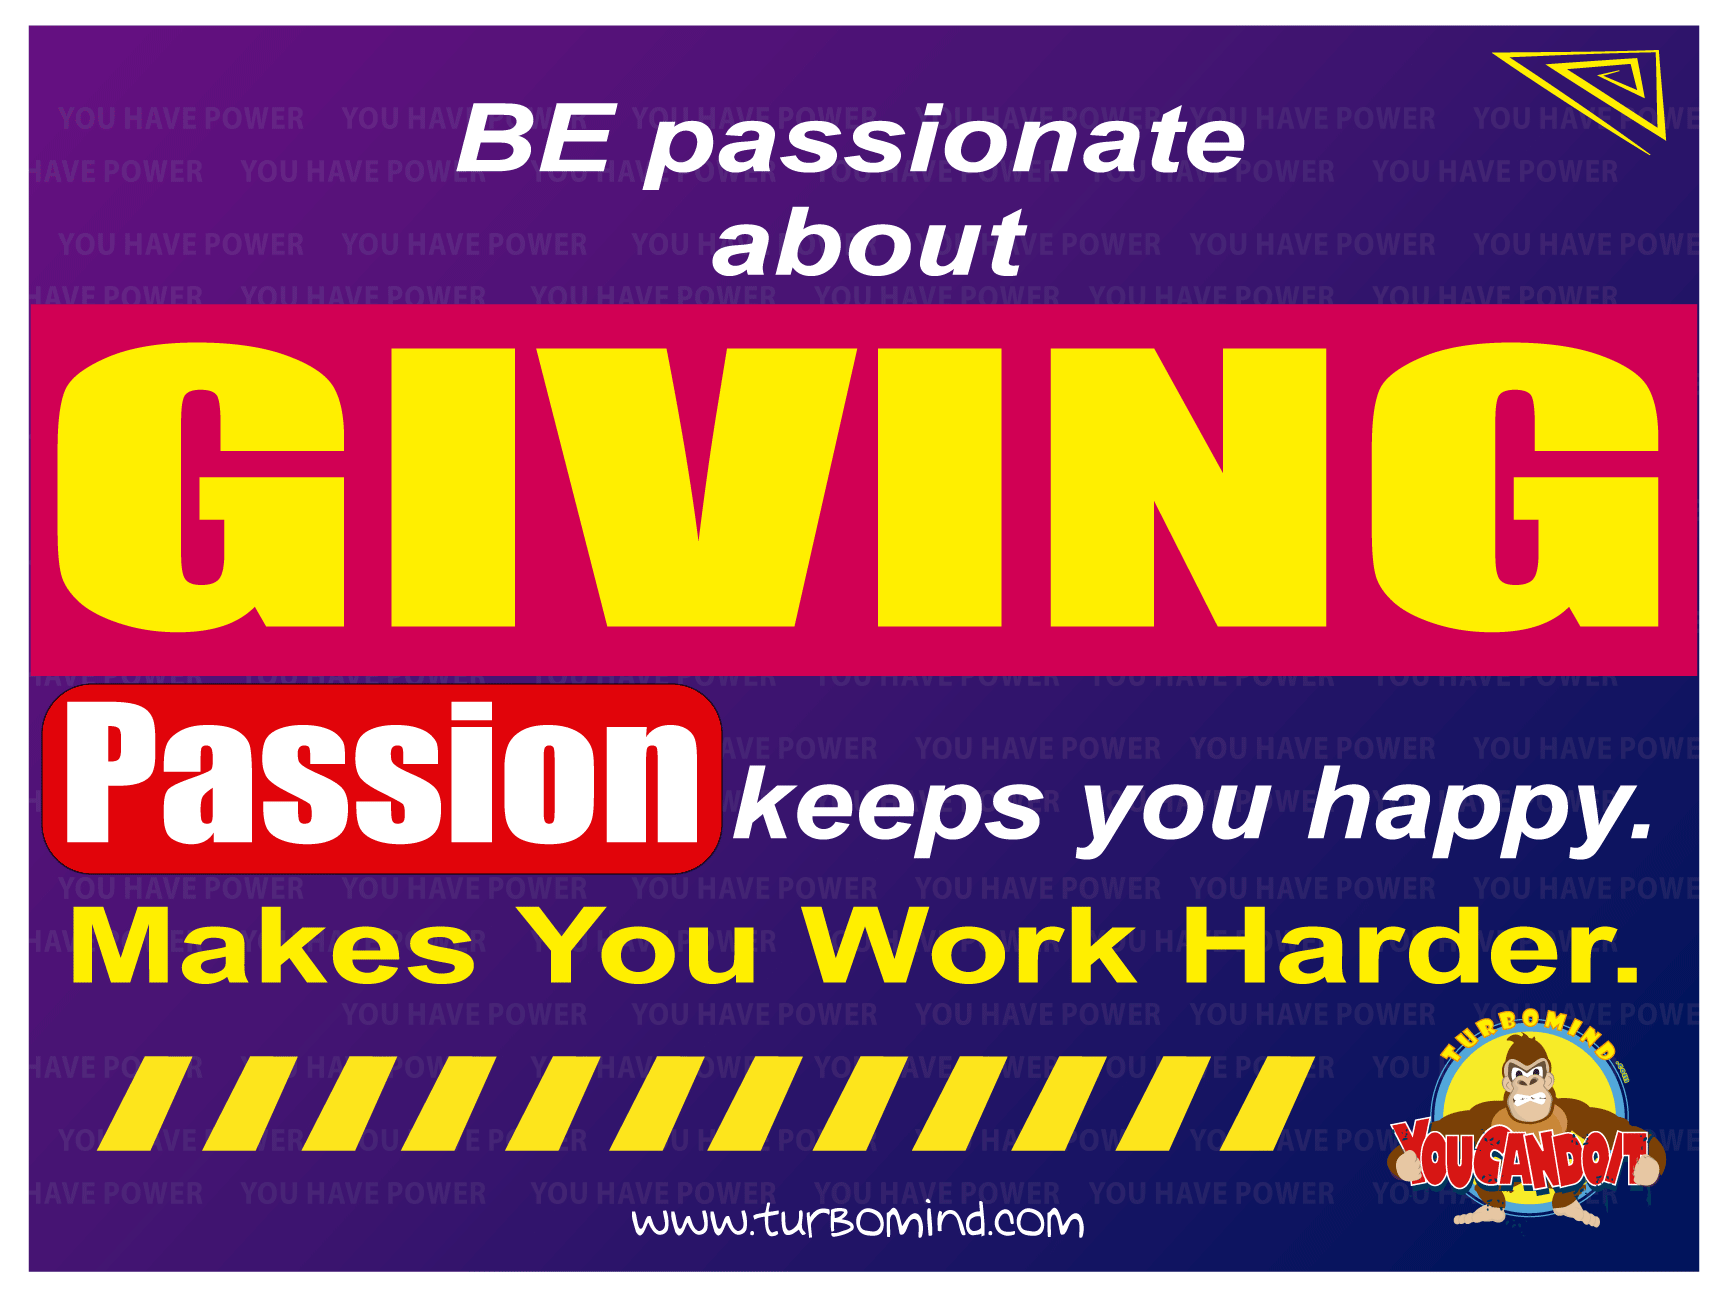 BE PASSIONATE ABOUT GIVING